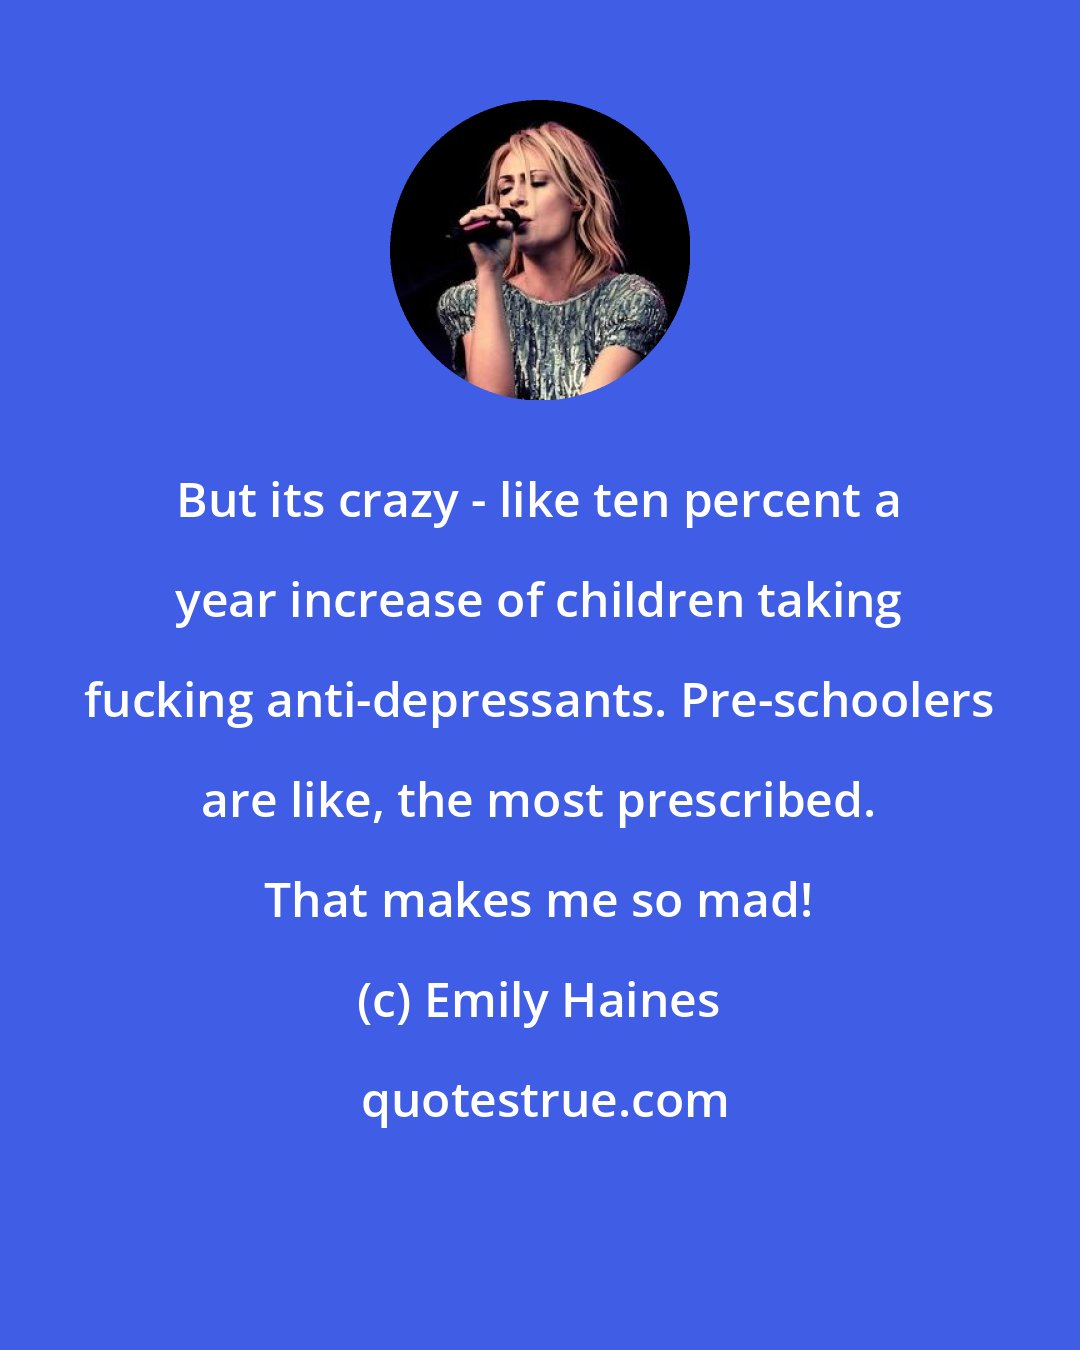 Emily Haines: But its crazy - like ten percent a year increase of children taking fucking anti-depressants. Pre-schoolers are like, the most prescribed. That makes me so mad!